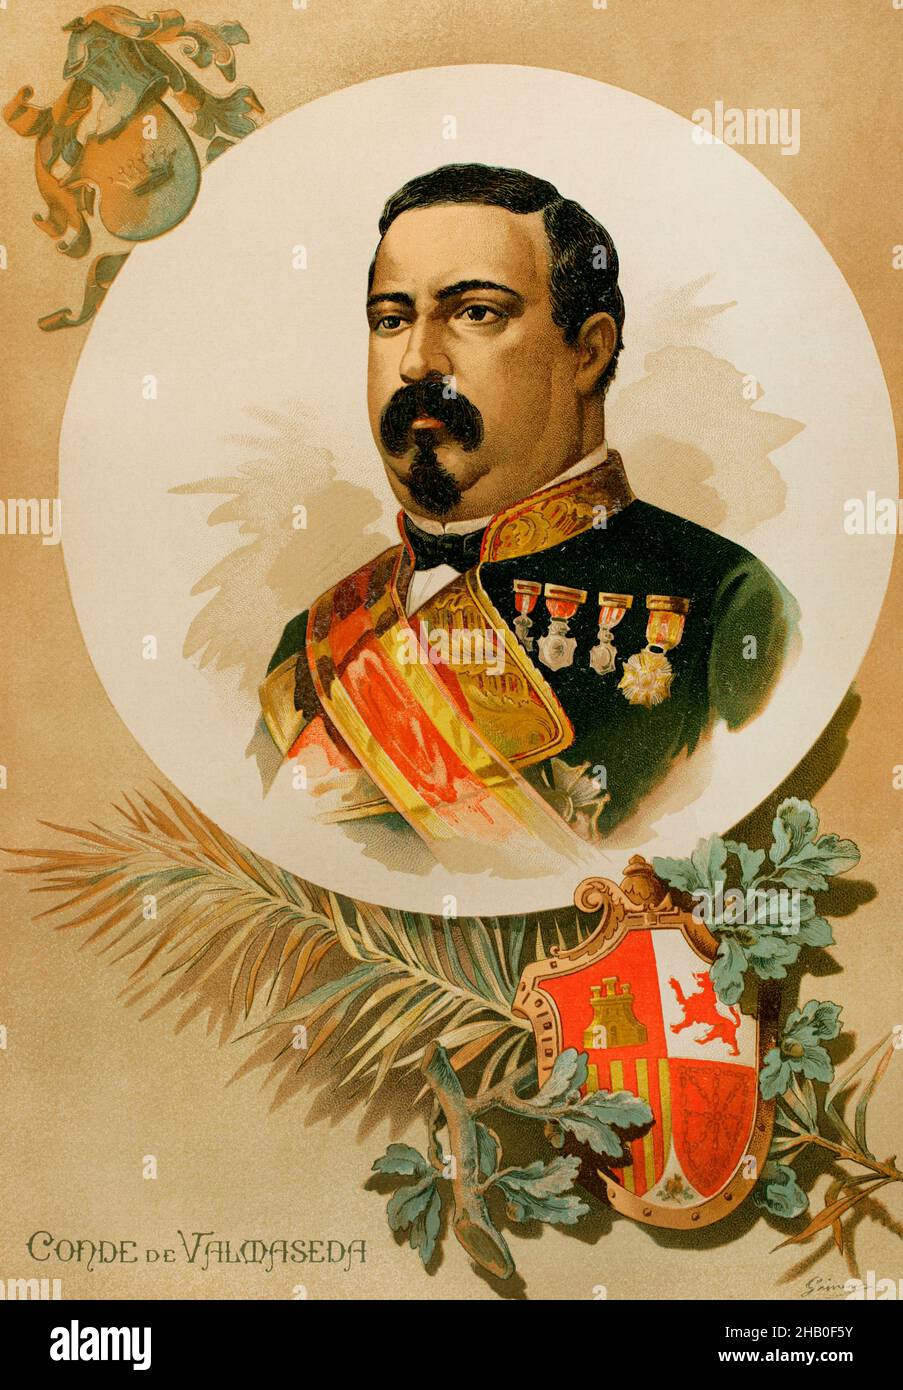 Blas de Villate y de la Hera (1824-1882). 1st count of Valmaseda. Spanish general. Captain General of the island of Cuba, in three appointments between 1867 and 1872. In February 1881, he was appointed Captain General of Castilla la Nueva (New Castile). Portrait. Chromolithography. General History of Spain, by Miguel Morayta. Volume VII. Madrid, 1893. Stock Photo